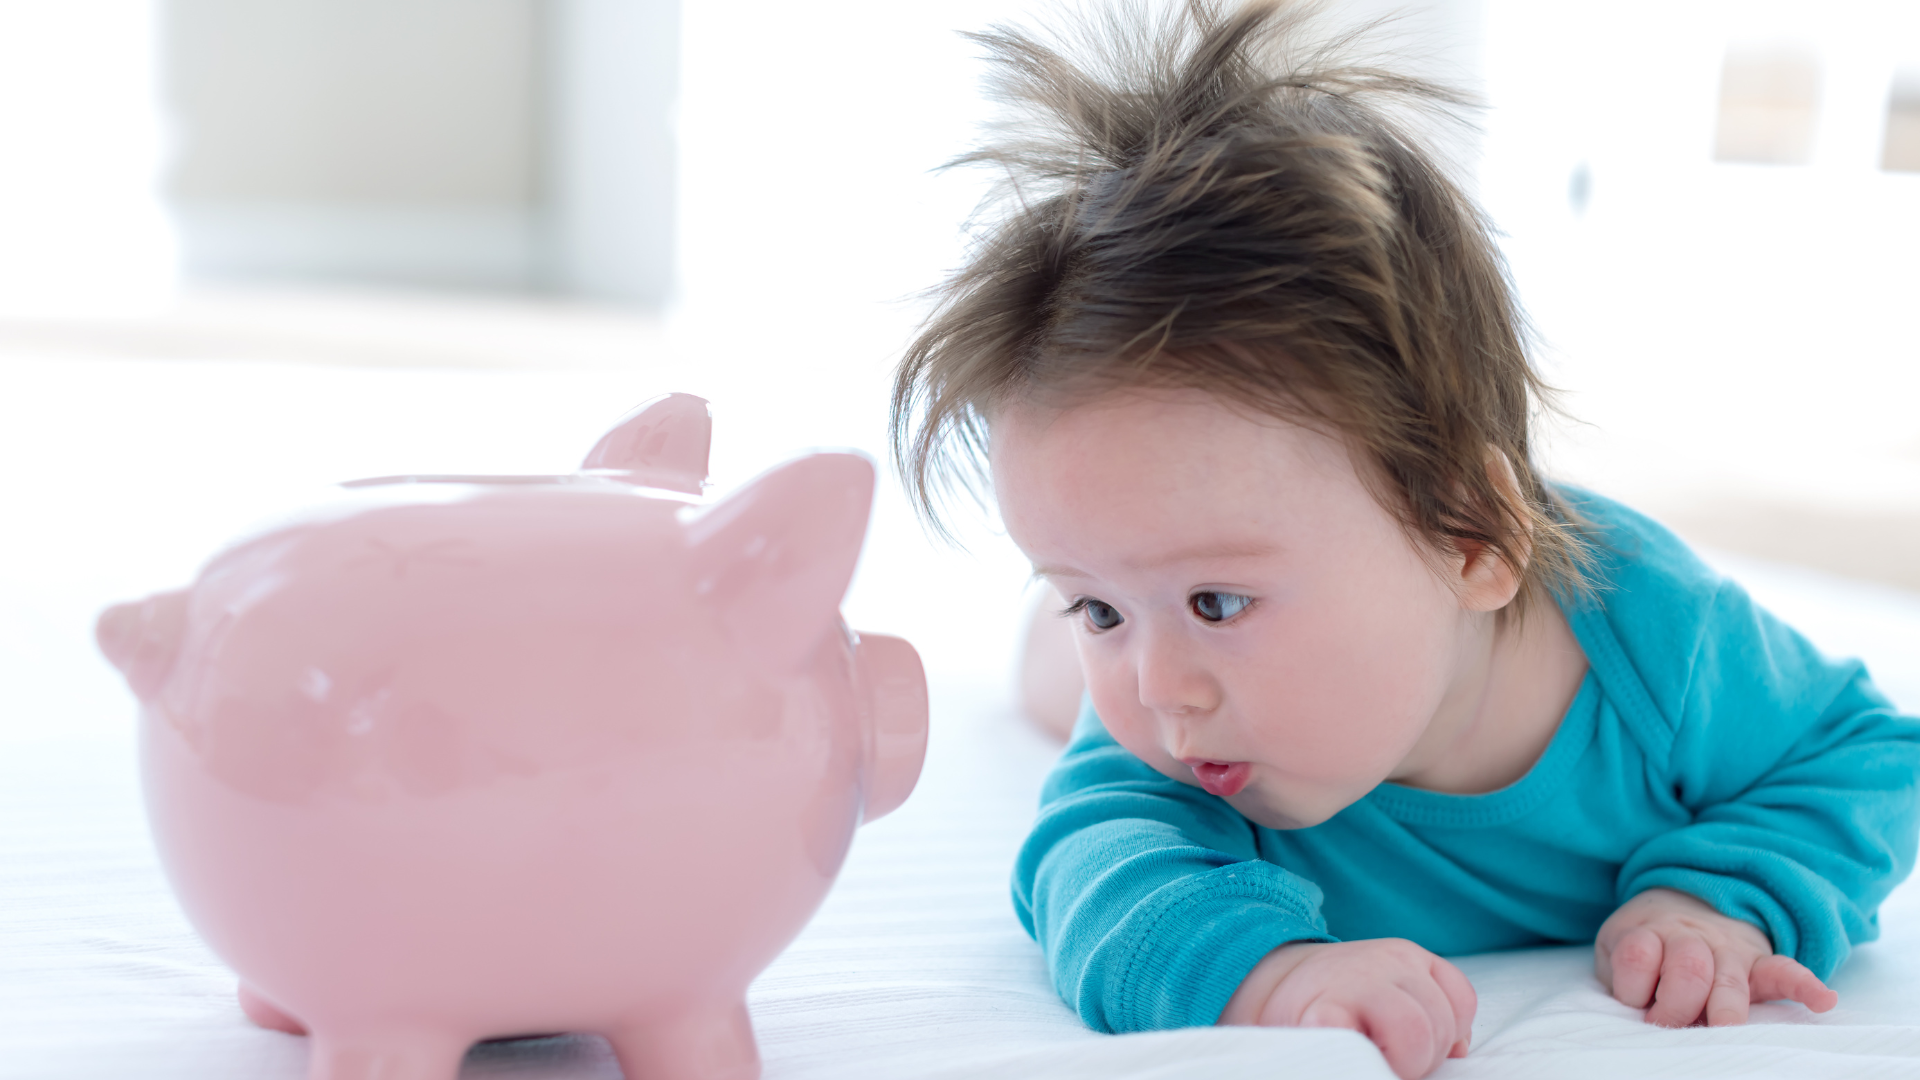 Babies of Homelessness child with piggy bank